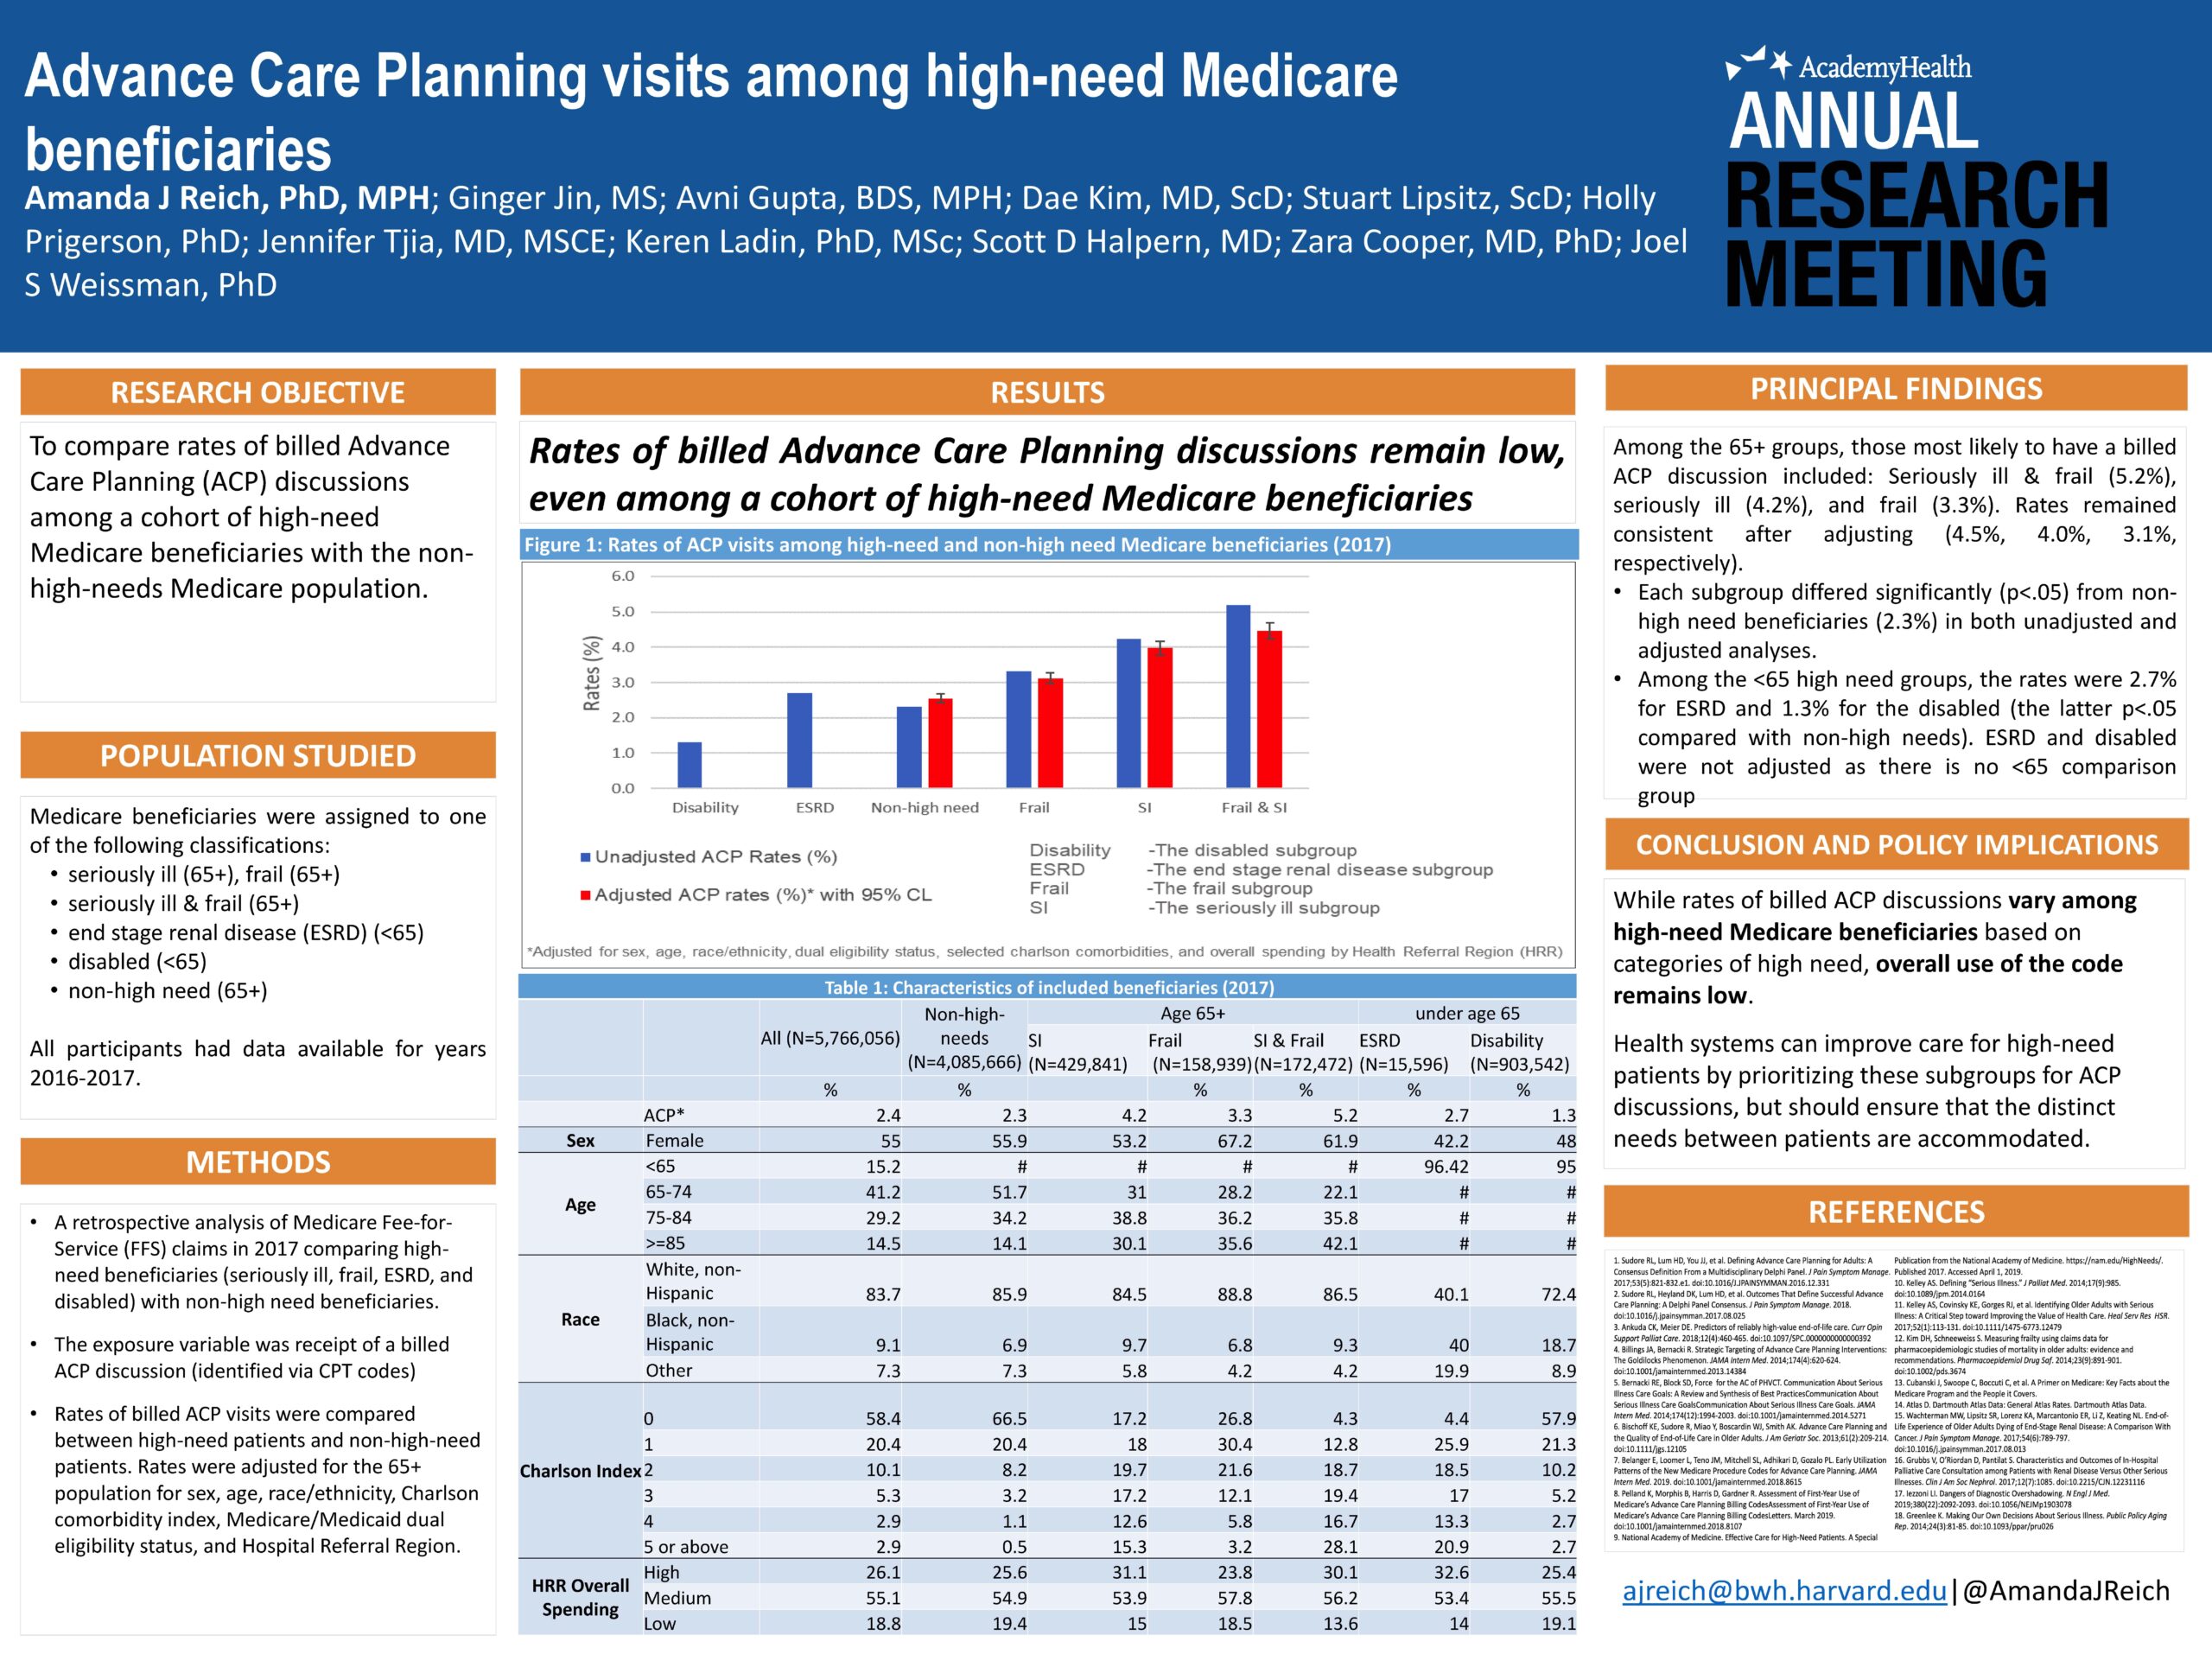 Academy Health Annual Meeting 2020: Advance Care Planning (ACP) Visits among High-Need Medicare Beneficiaries